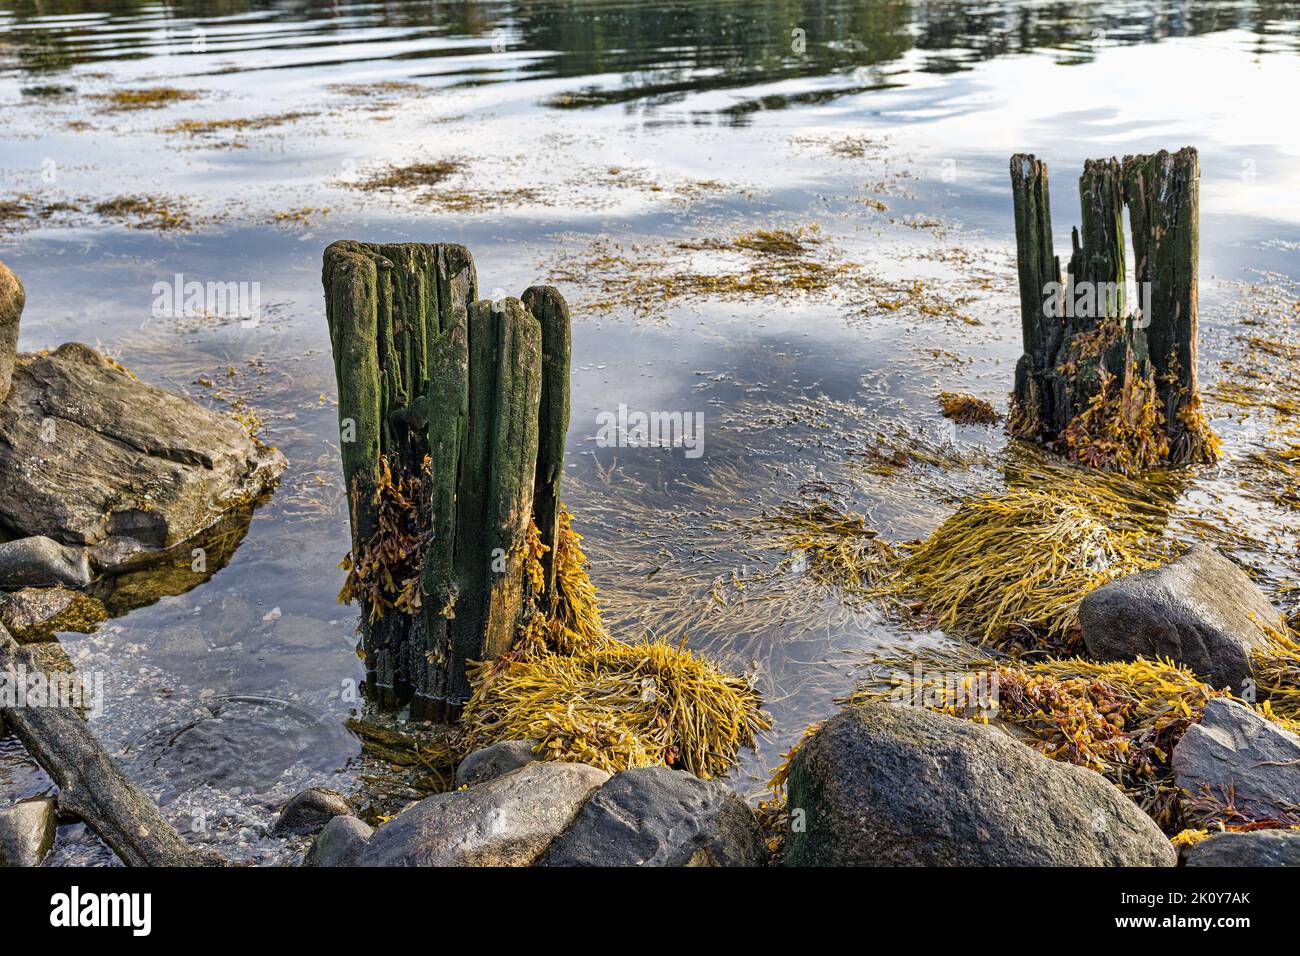 Low tide showing rugged rocks and ledges along the coast of Maine in the early morning light. Stock Photo